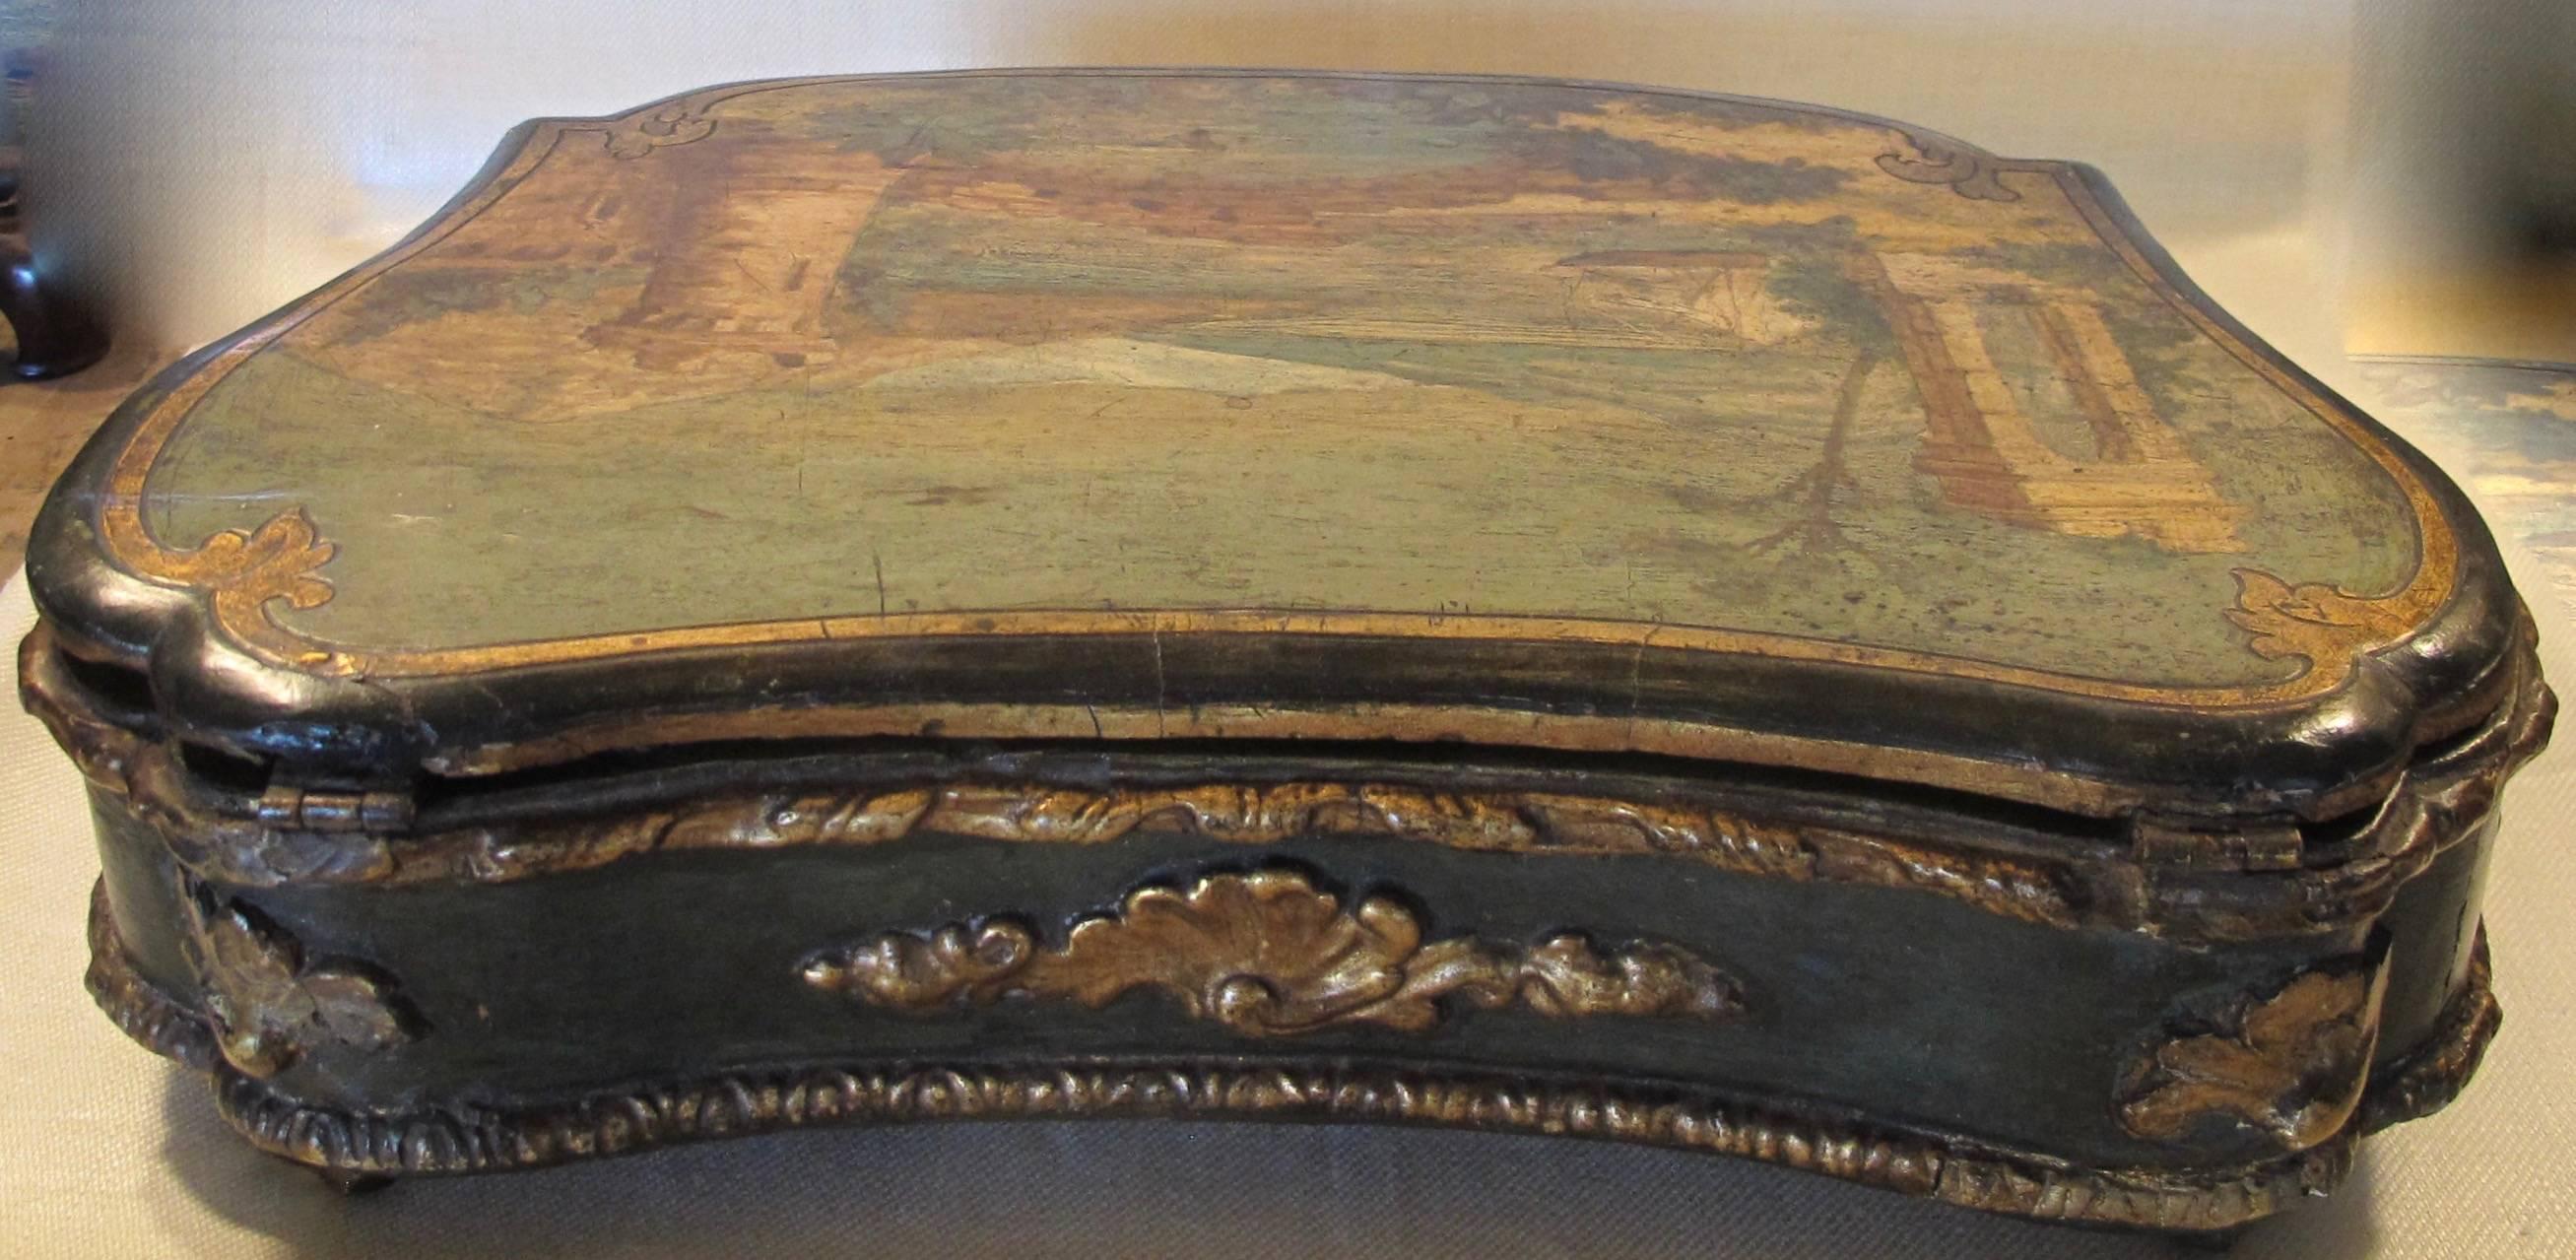 Rococo Hand-Painted and Decoupage Shaped Box, 18th Century